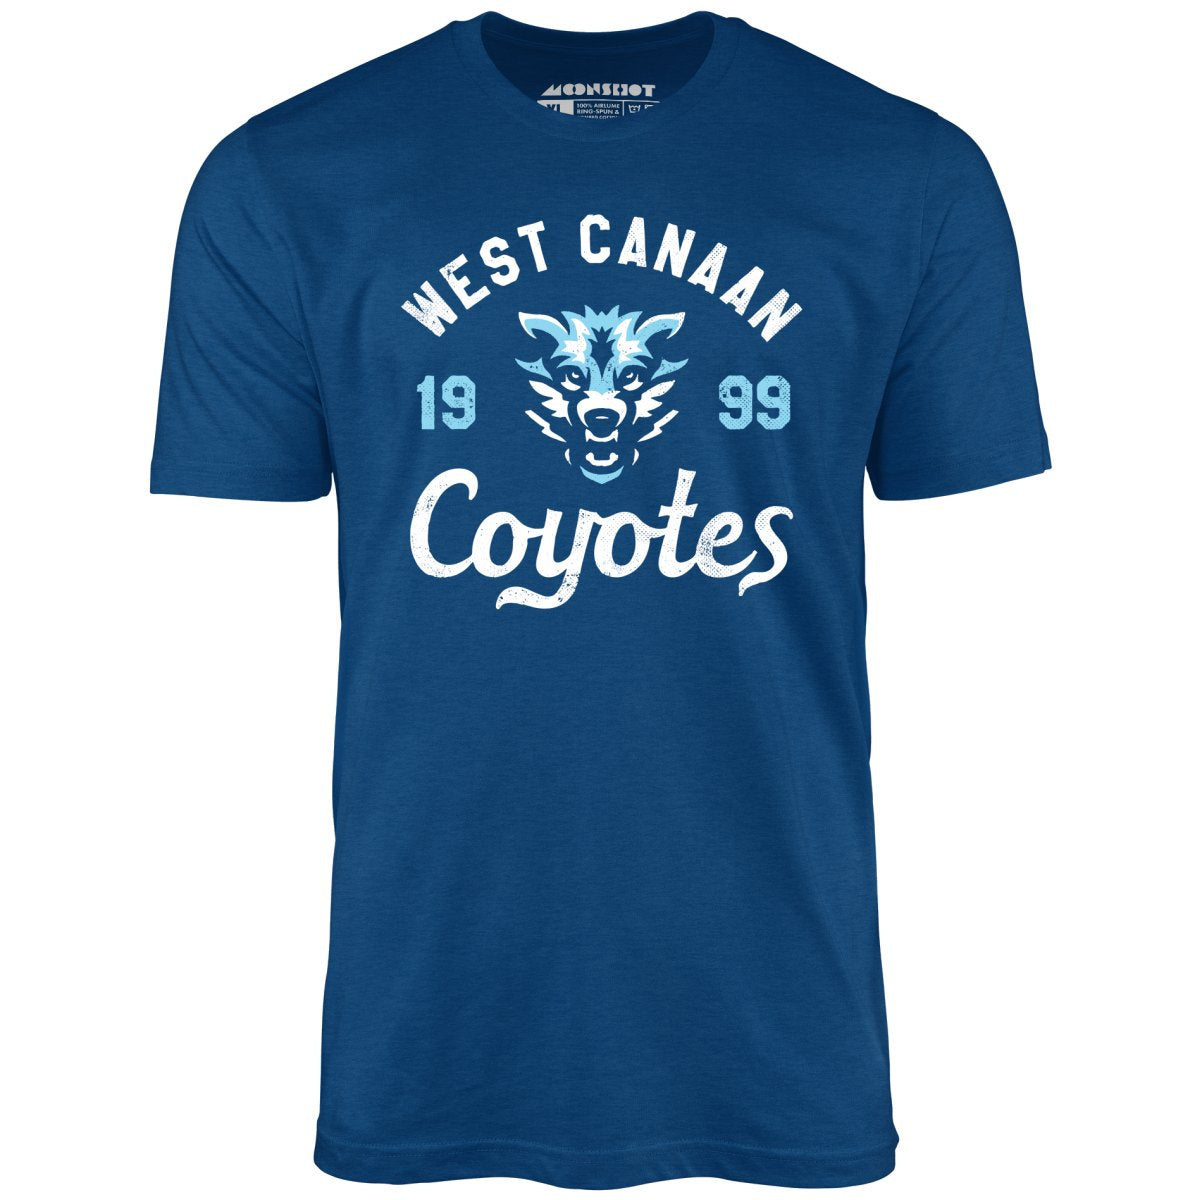 West Canaan Coyotes - Unisex T-Shirt